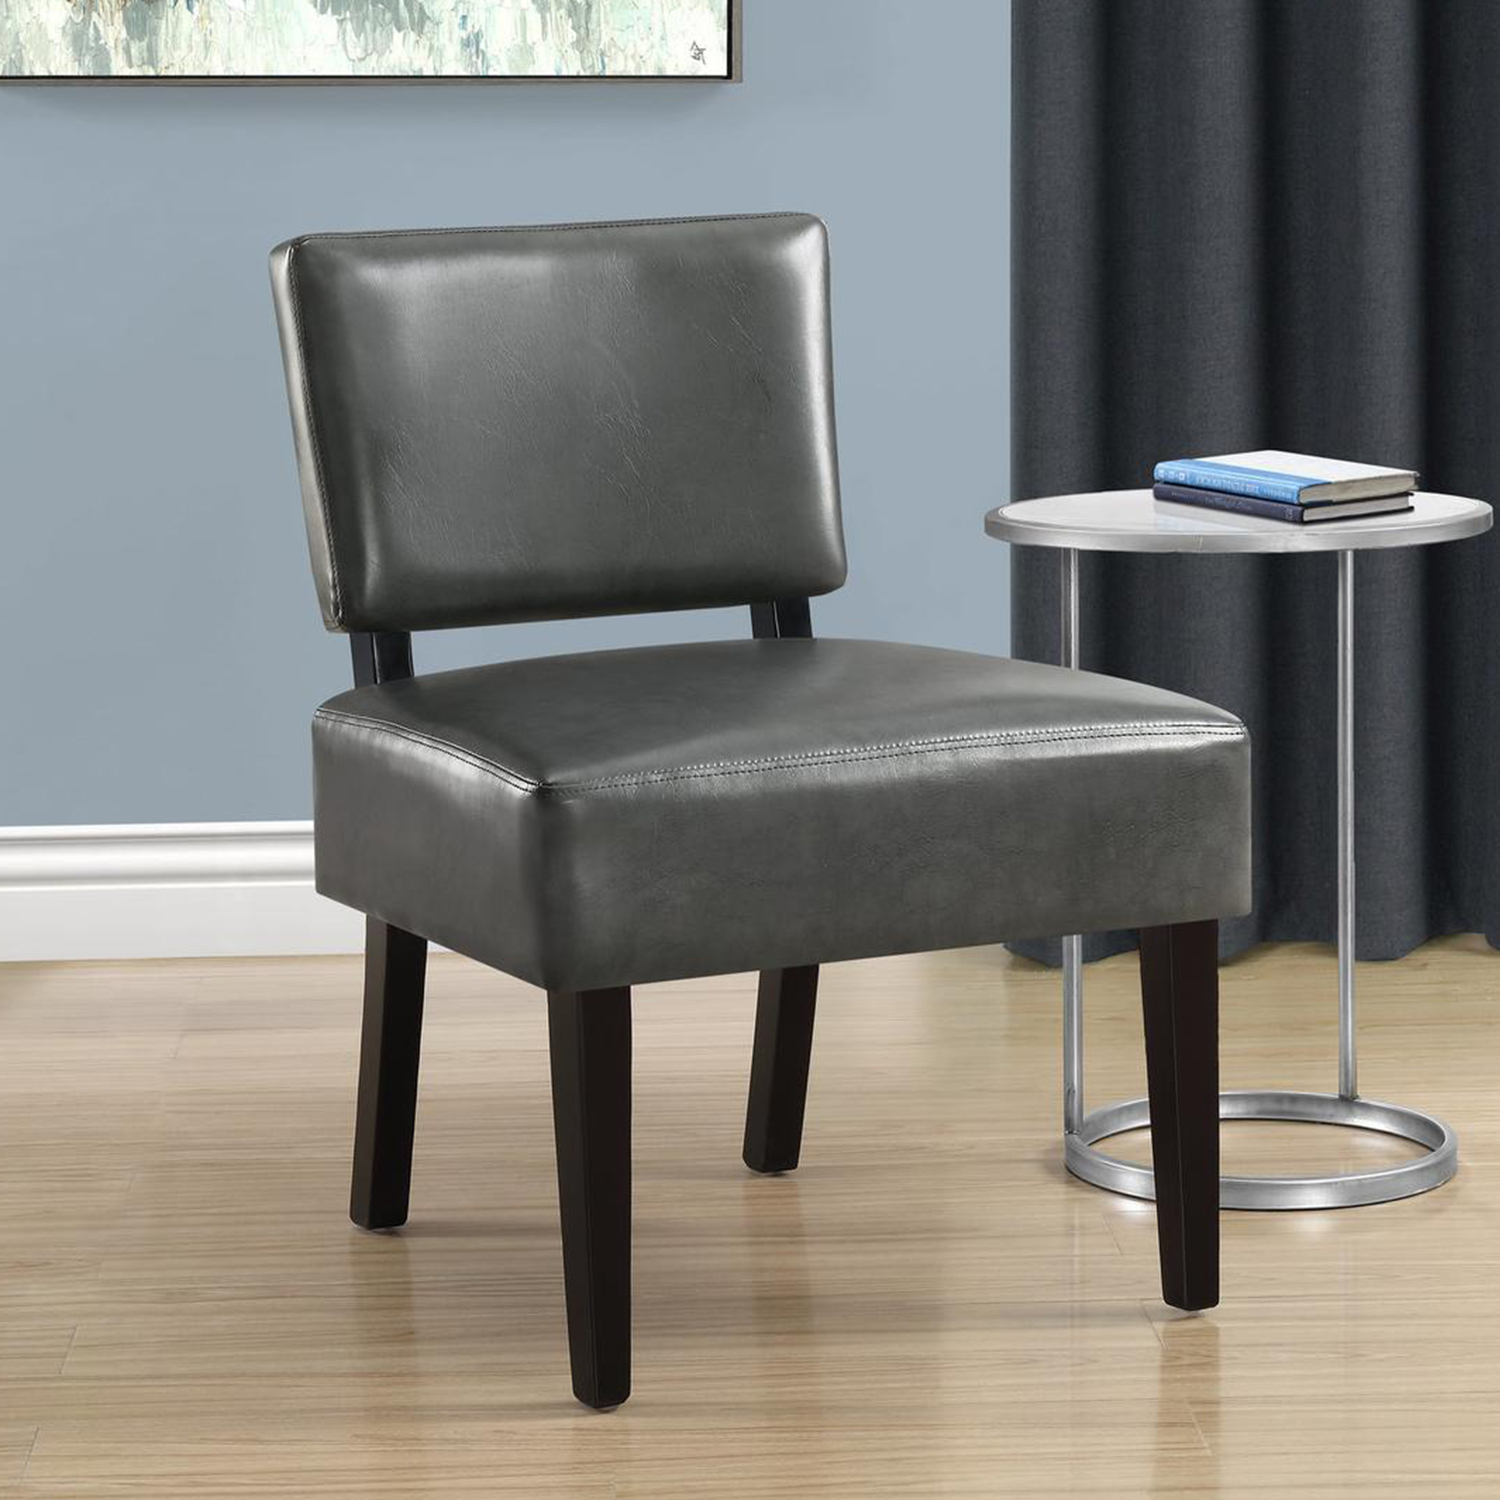 27.5" x 22.75" x 31.5" Charcoal Leather-Look Foam Accent Chair with Solid Wood Frame